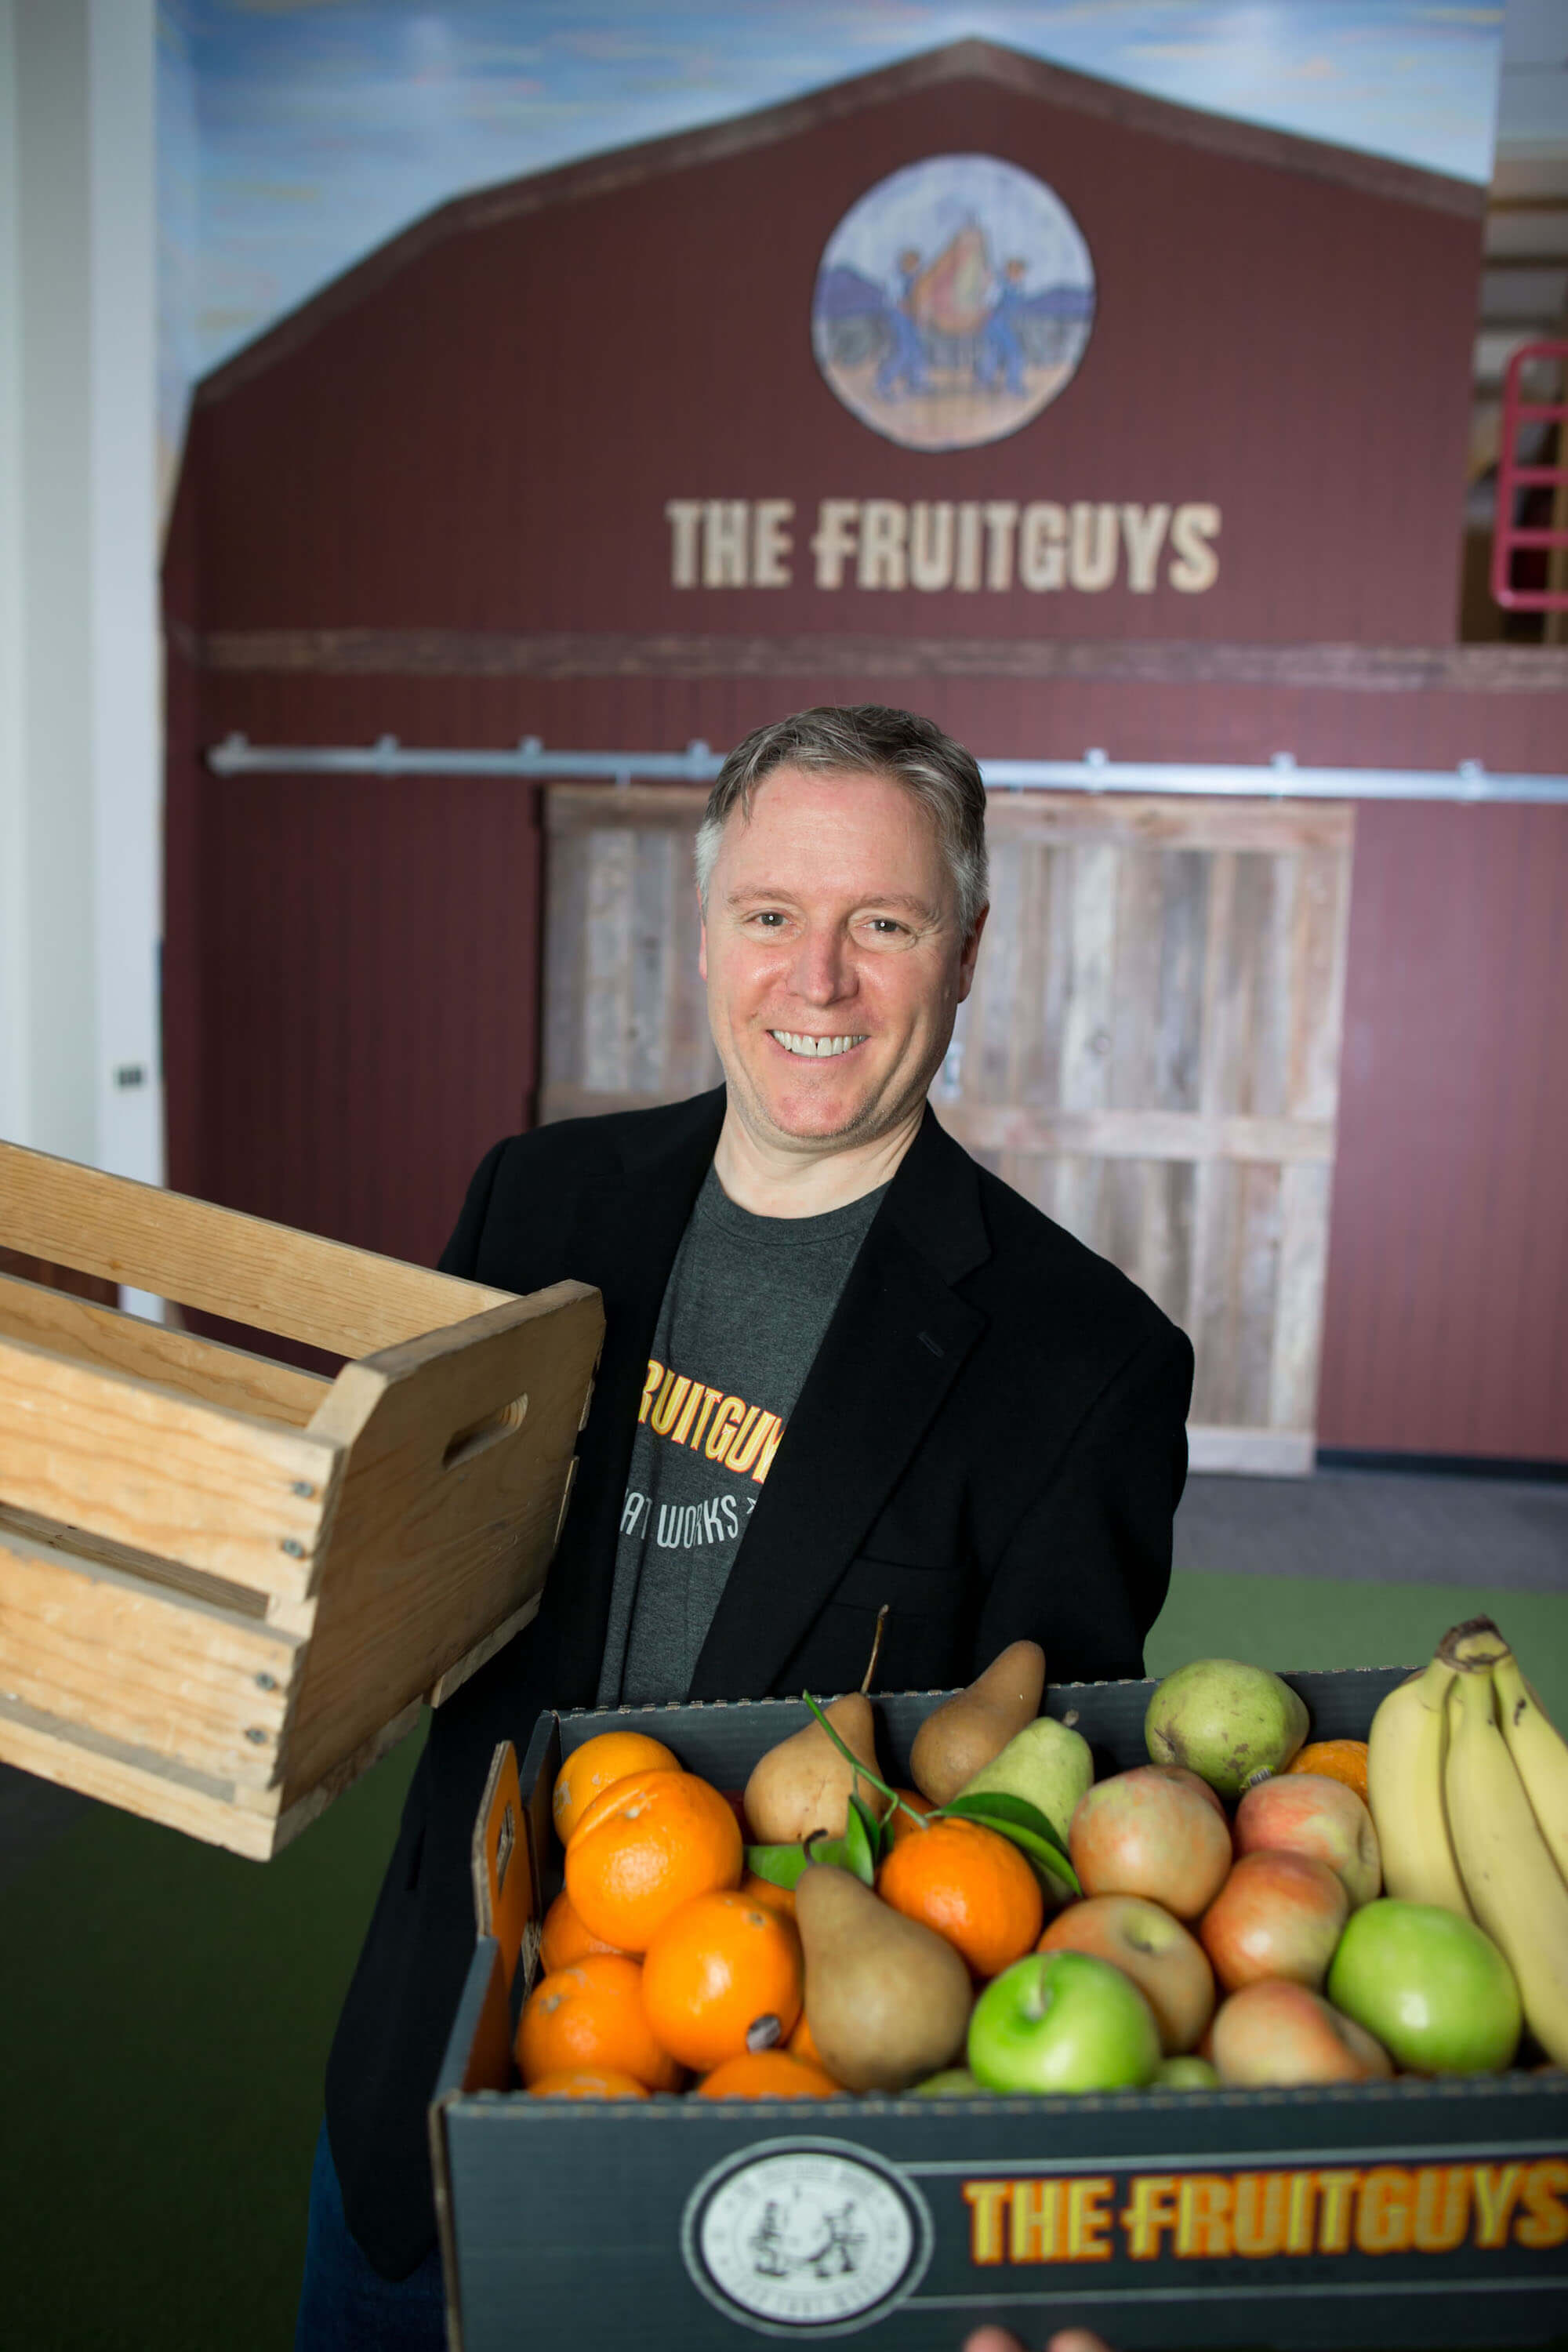 The FruitGuys: Delivering Positivity